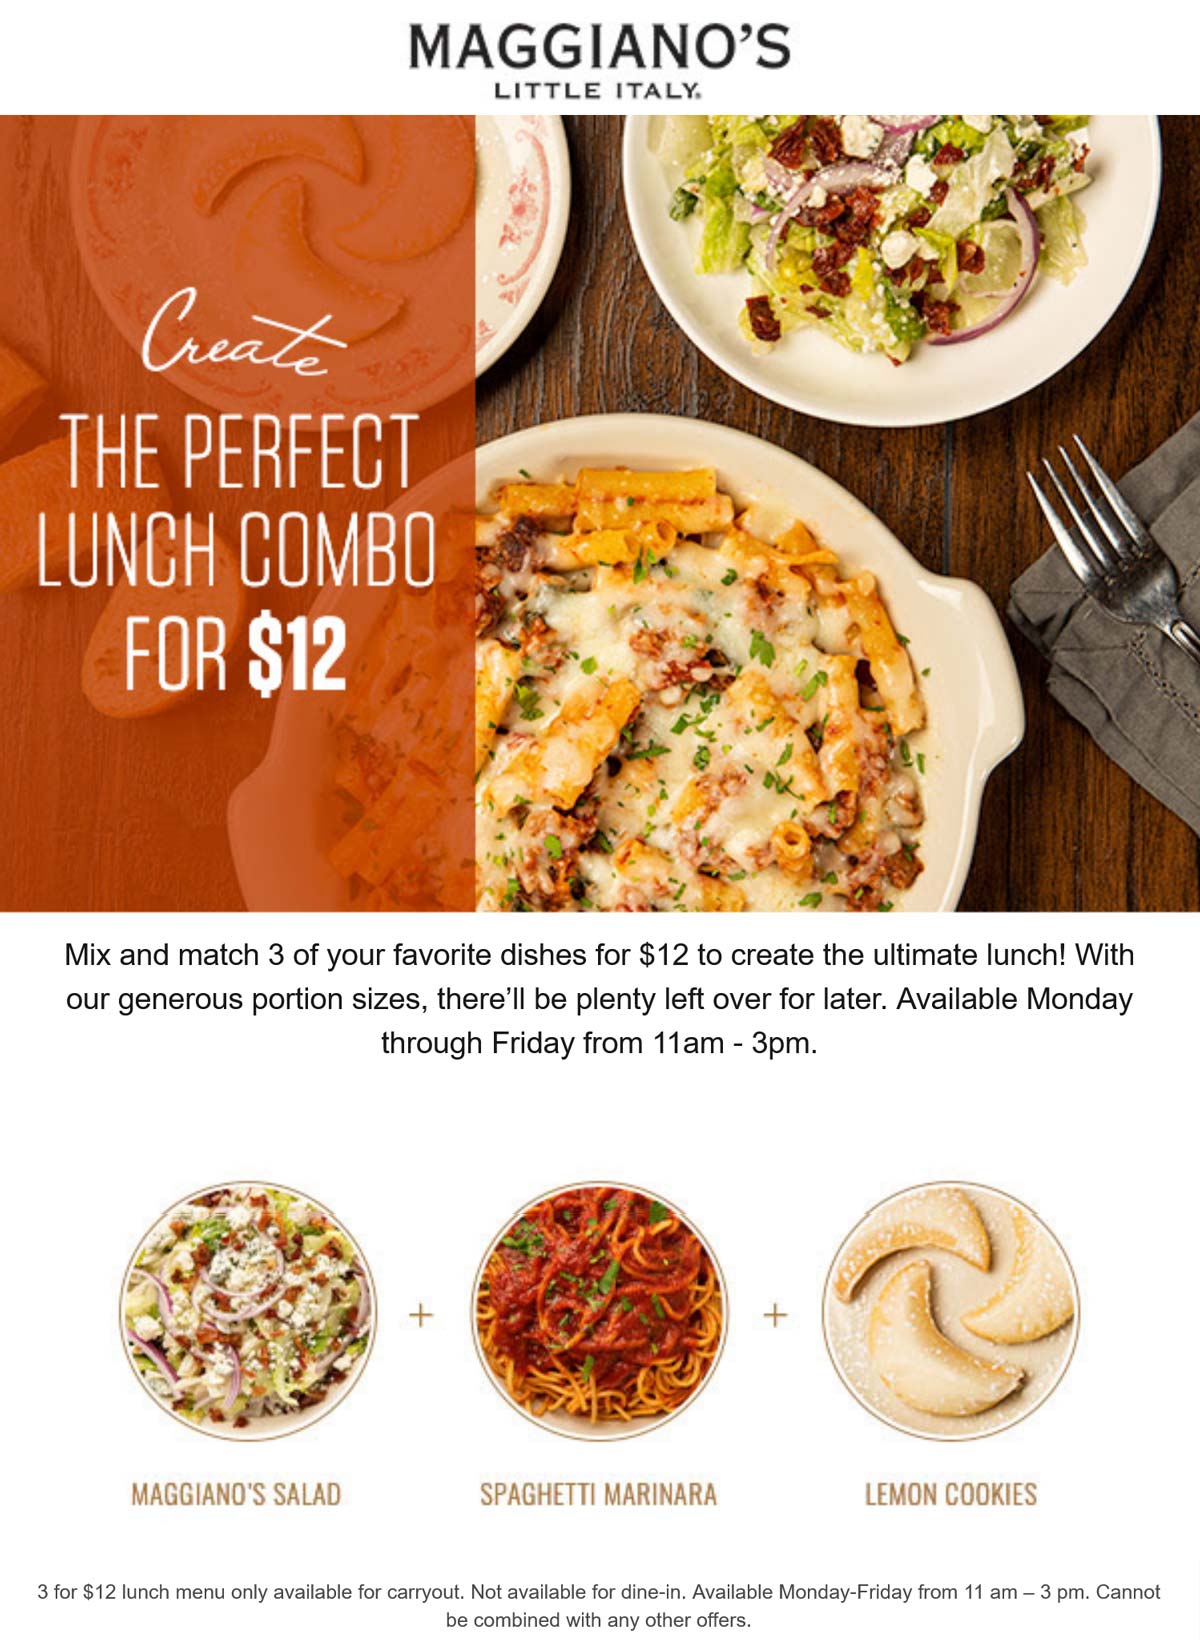 Maggianos Little Italy restaurants Coupon  Mix & match 3 lunch dishes for $12 weekdays at Maggianos Little Italy #maggianoslittleitaly 